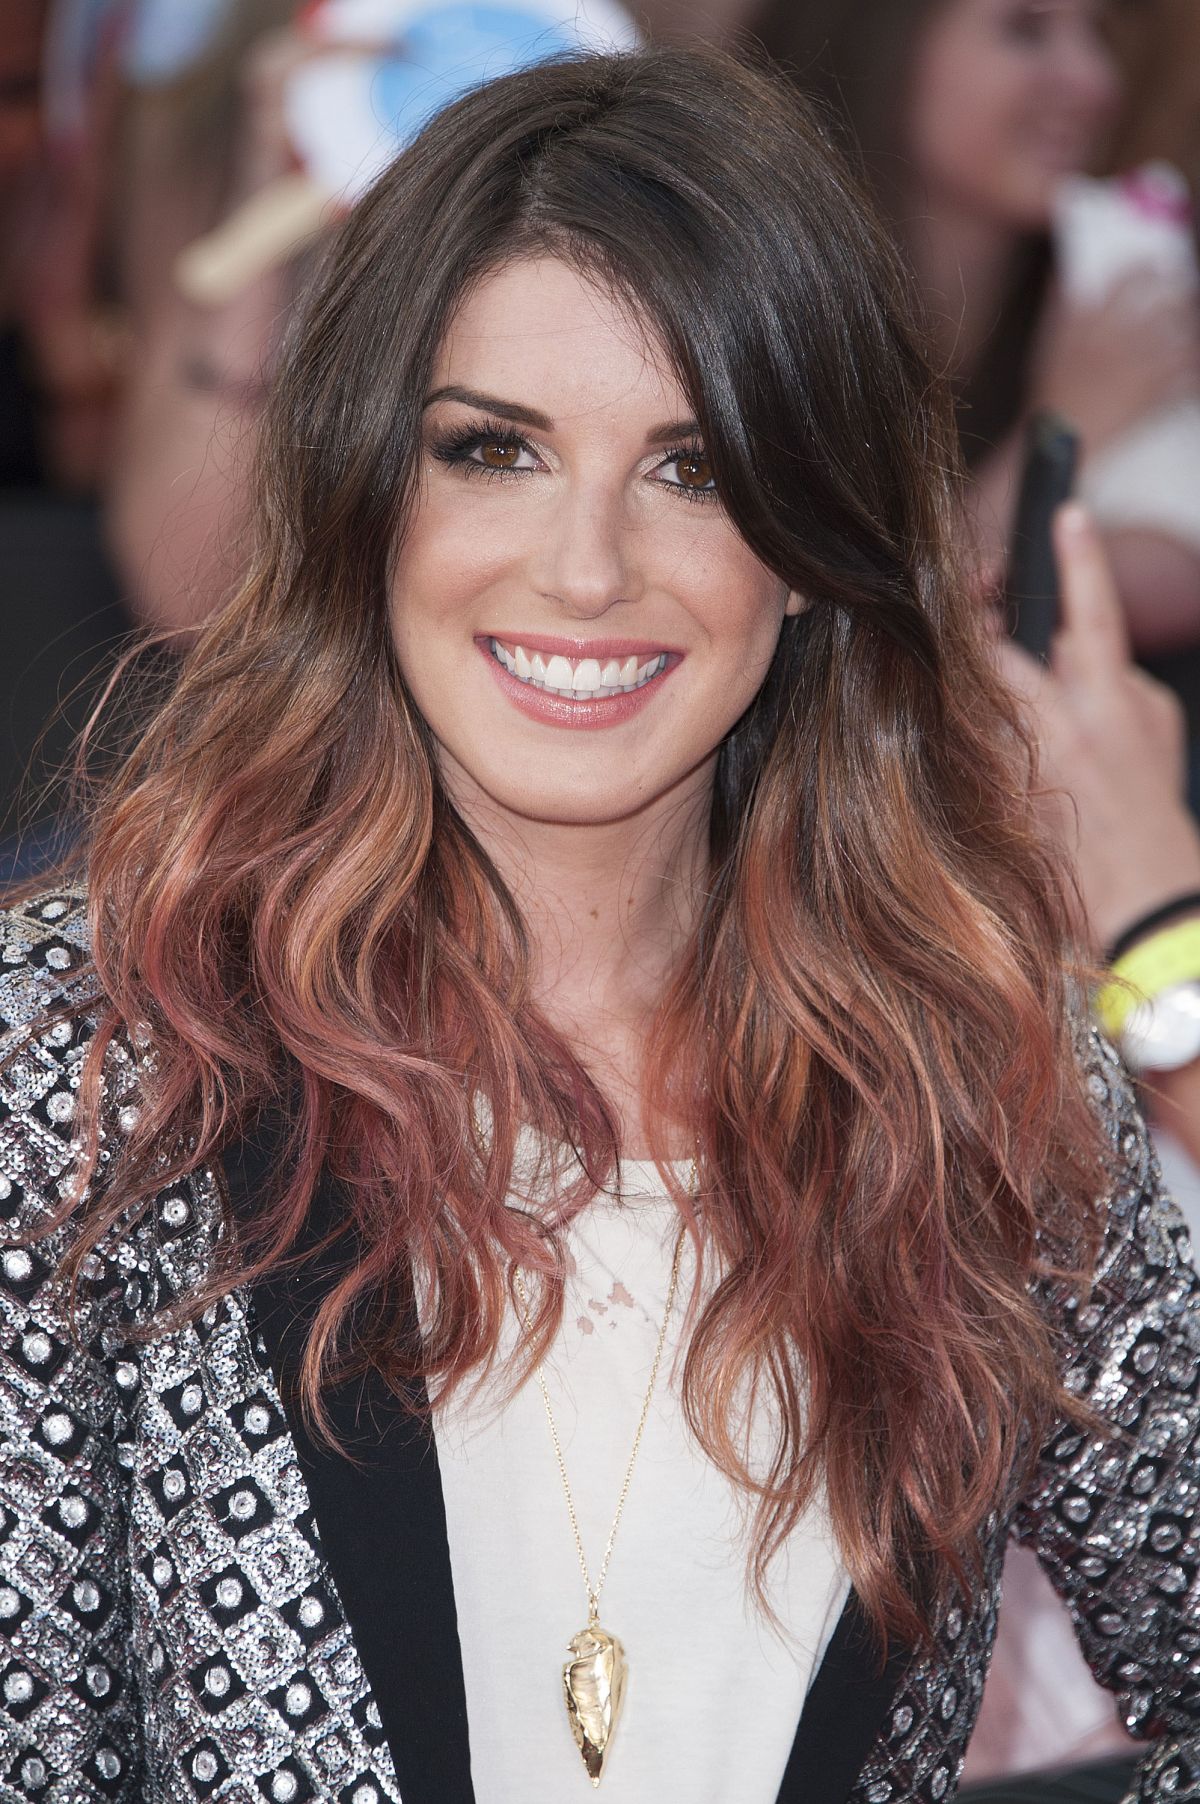 SHENAE GRIMES at Muchmusic Video Awards in Toronto – HawtCelebs